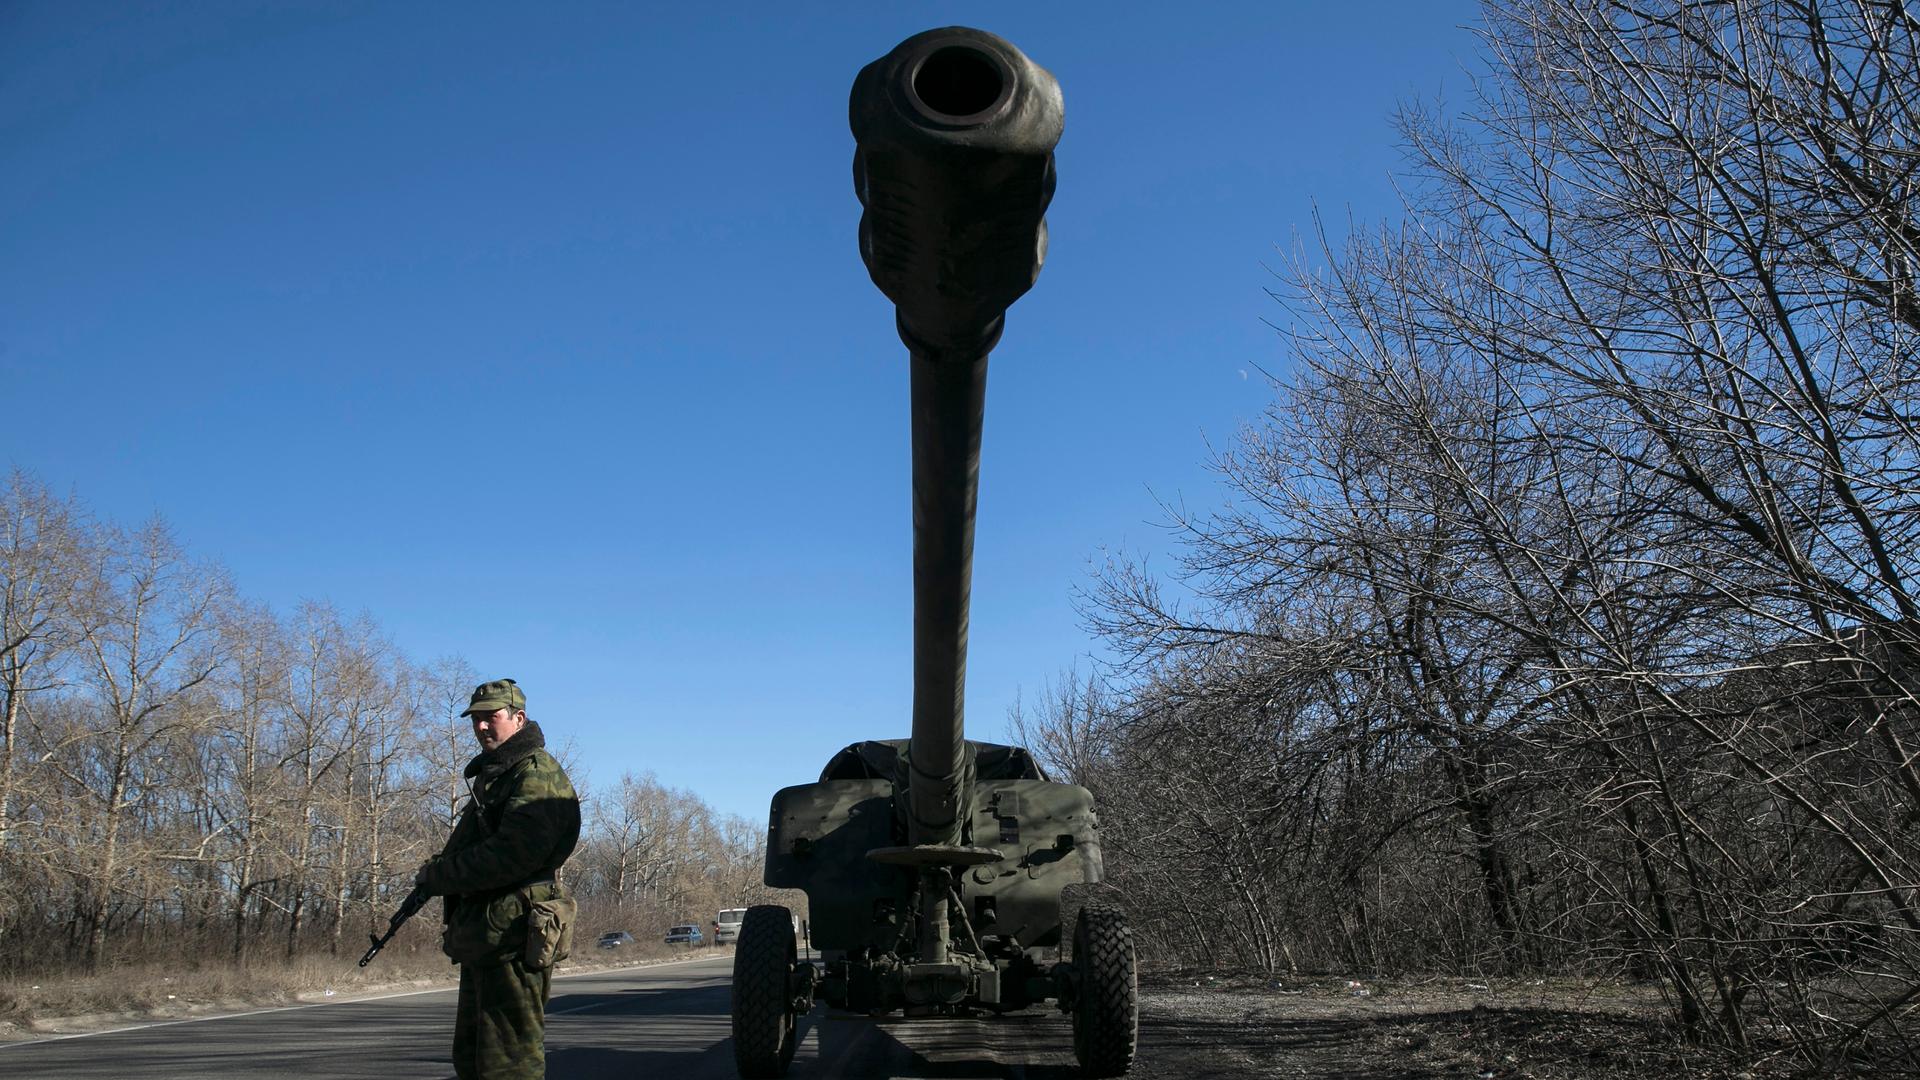 An armed man stands near a truck of the separatist self-proclaimed Donetsk People's Republic army towing a mobile artillery cannon, February 24, 2015.